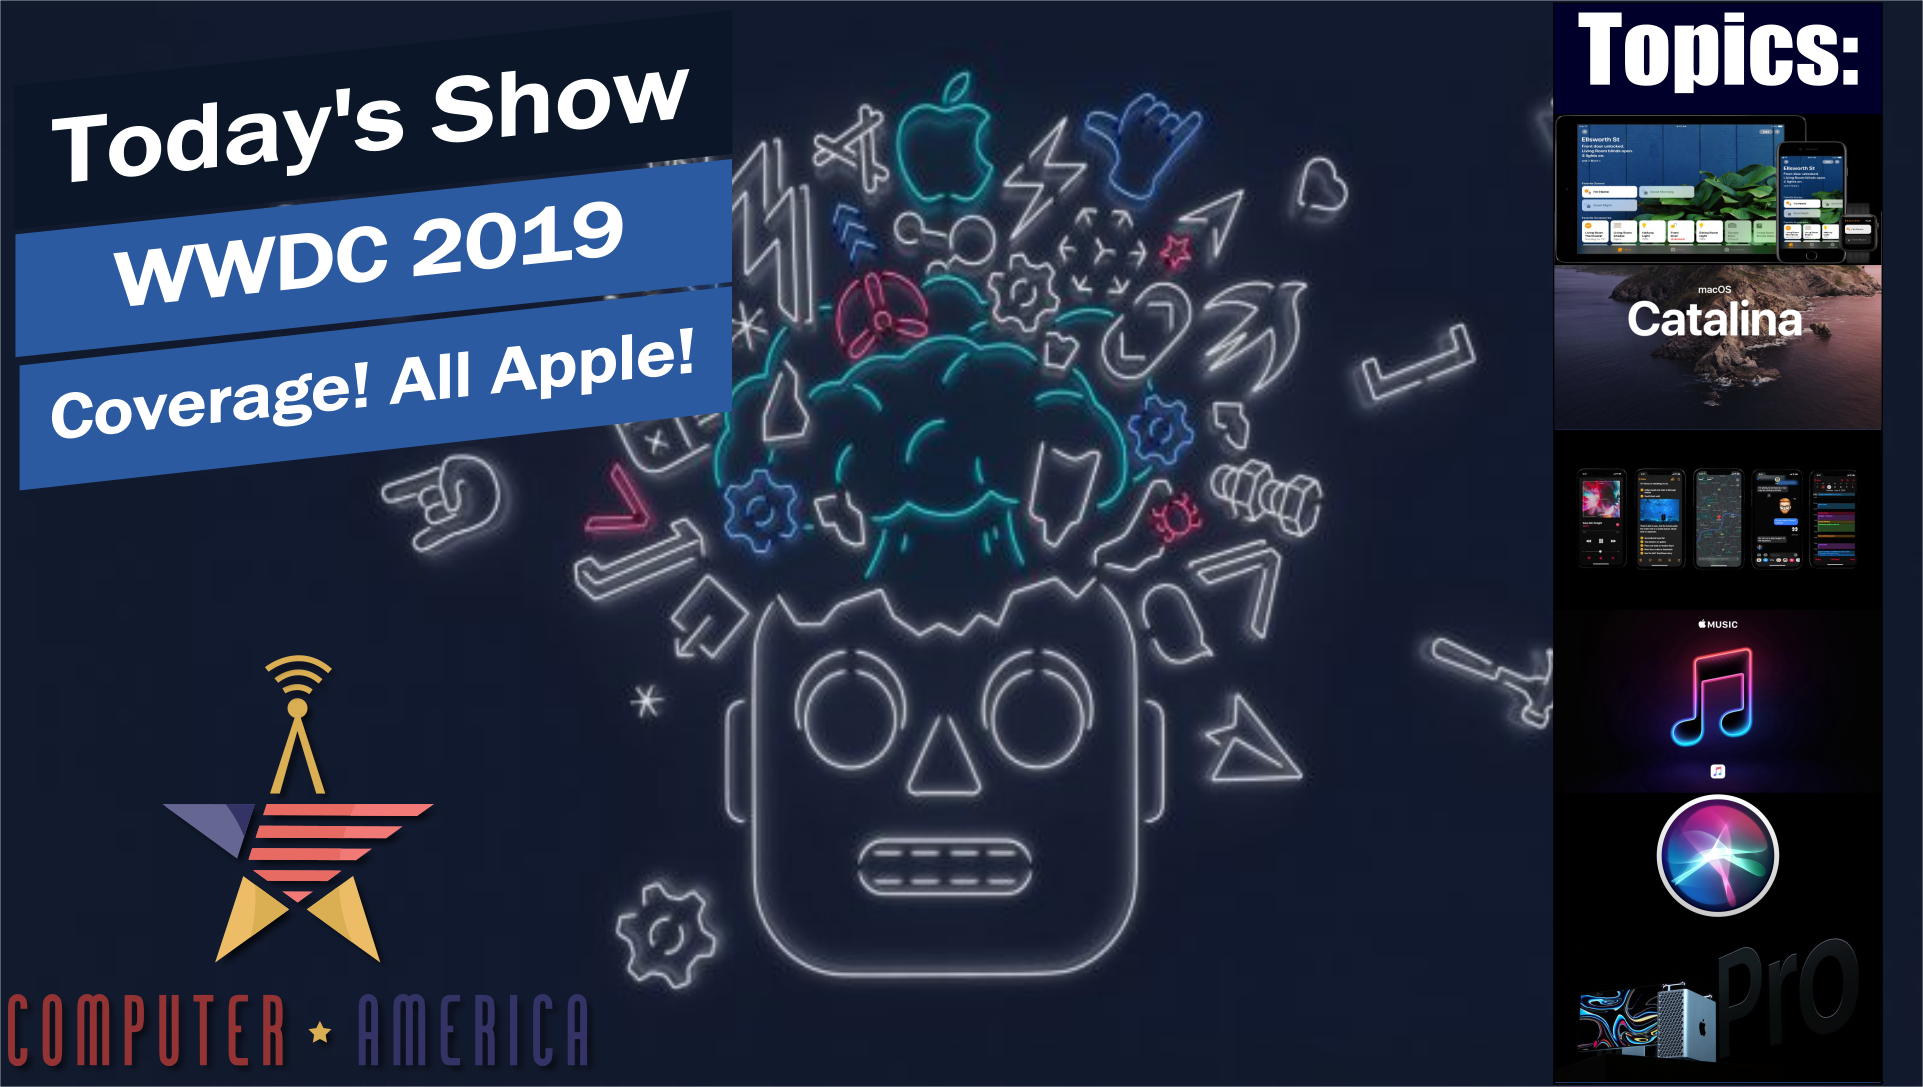 WWDC 2019 Highlights and Overview!